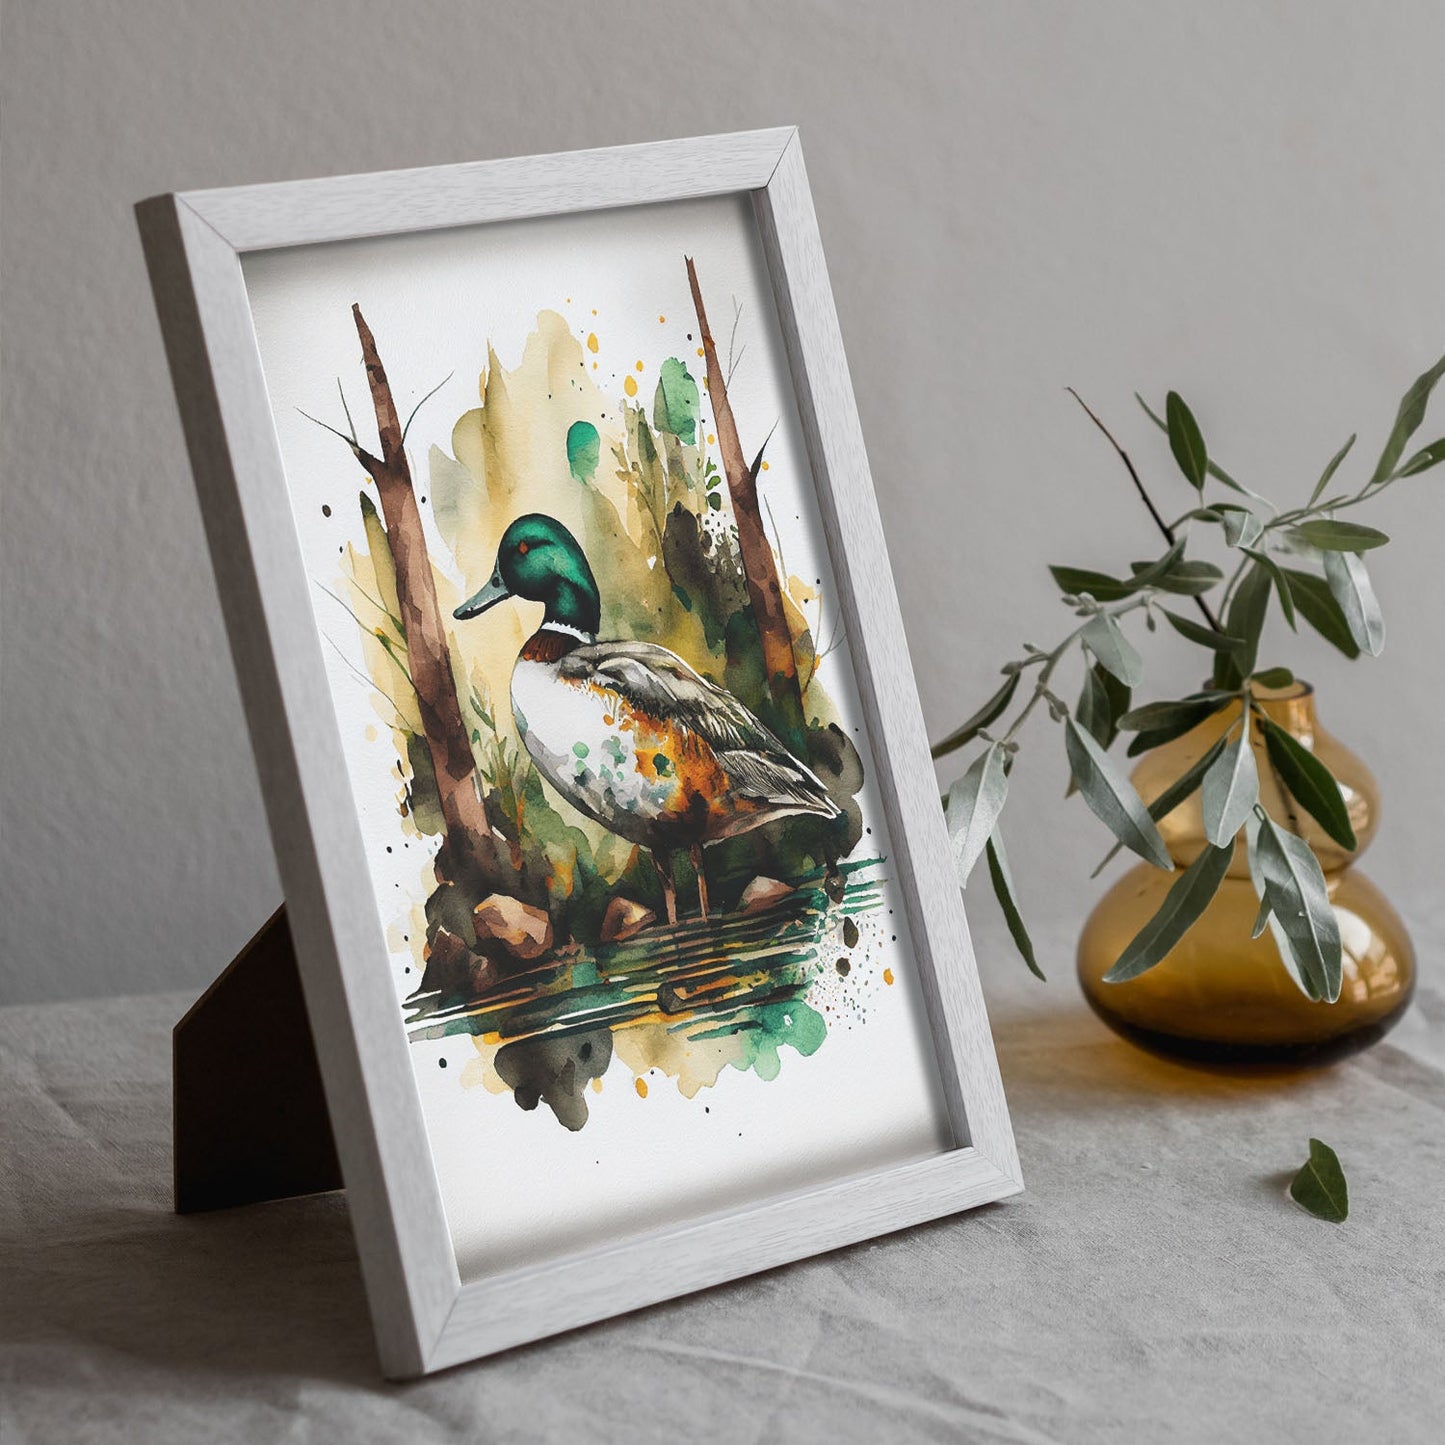 Nacnic Watercolor of Duck in the forest. Aesthetic Wall Art Prints for Bedroom or Living Room Design.